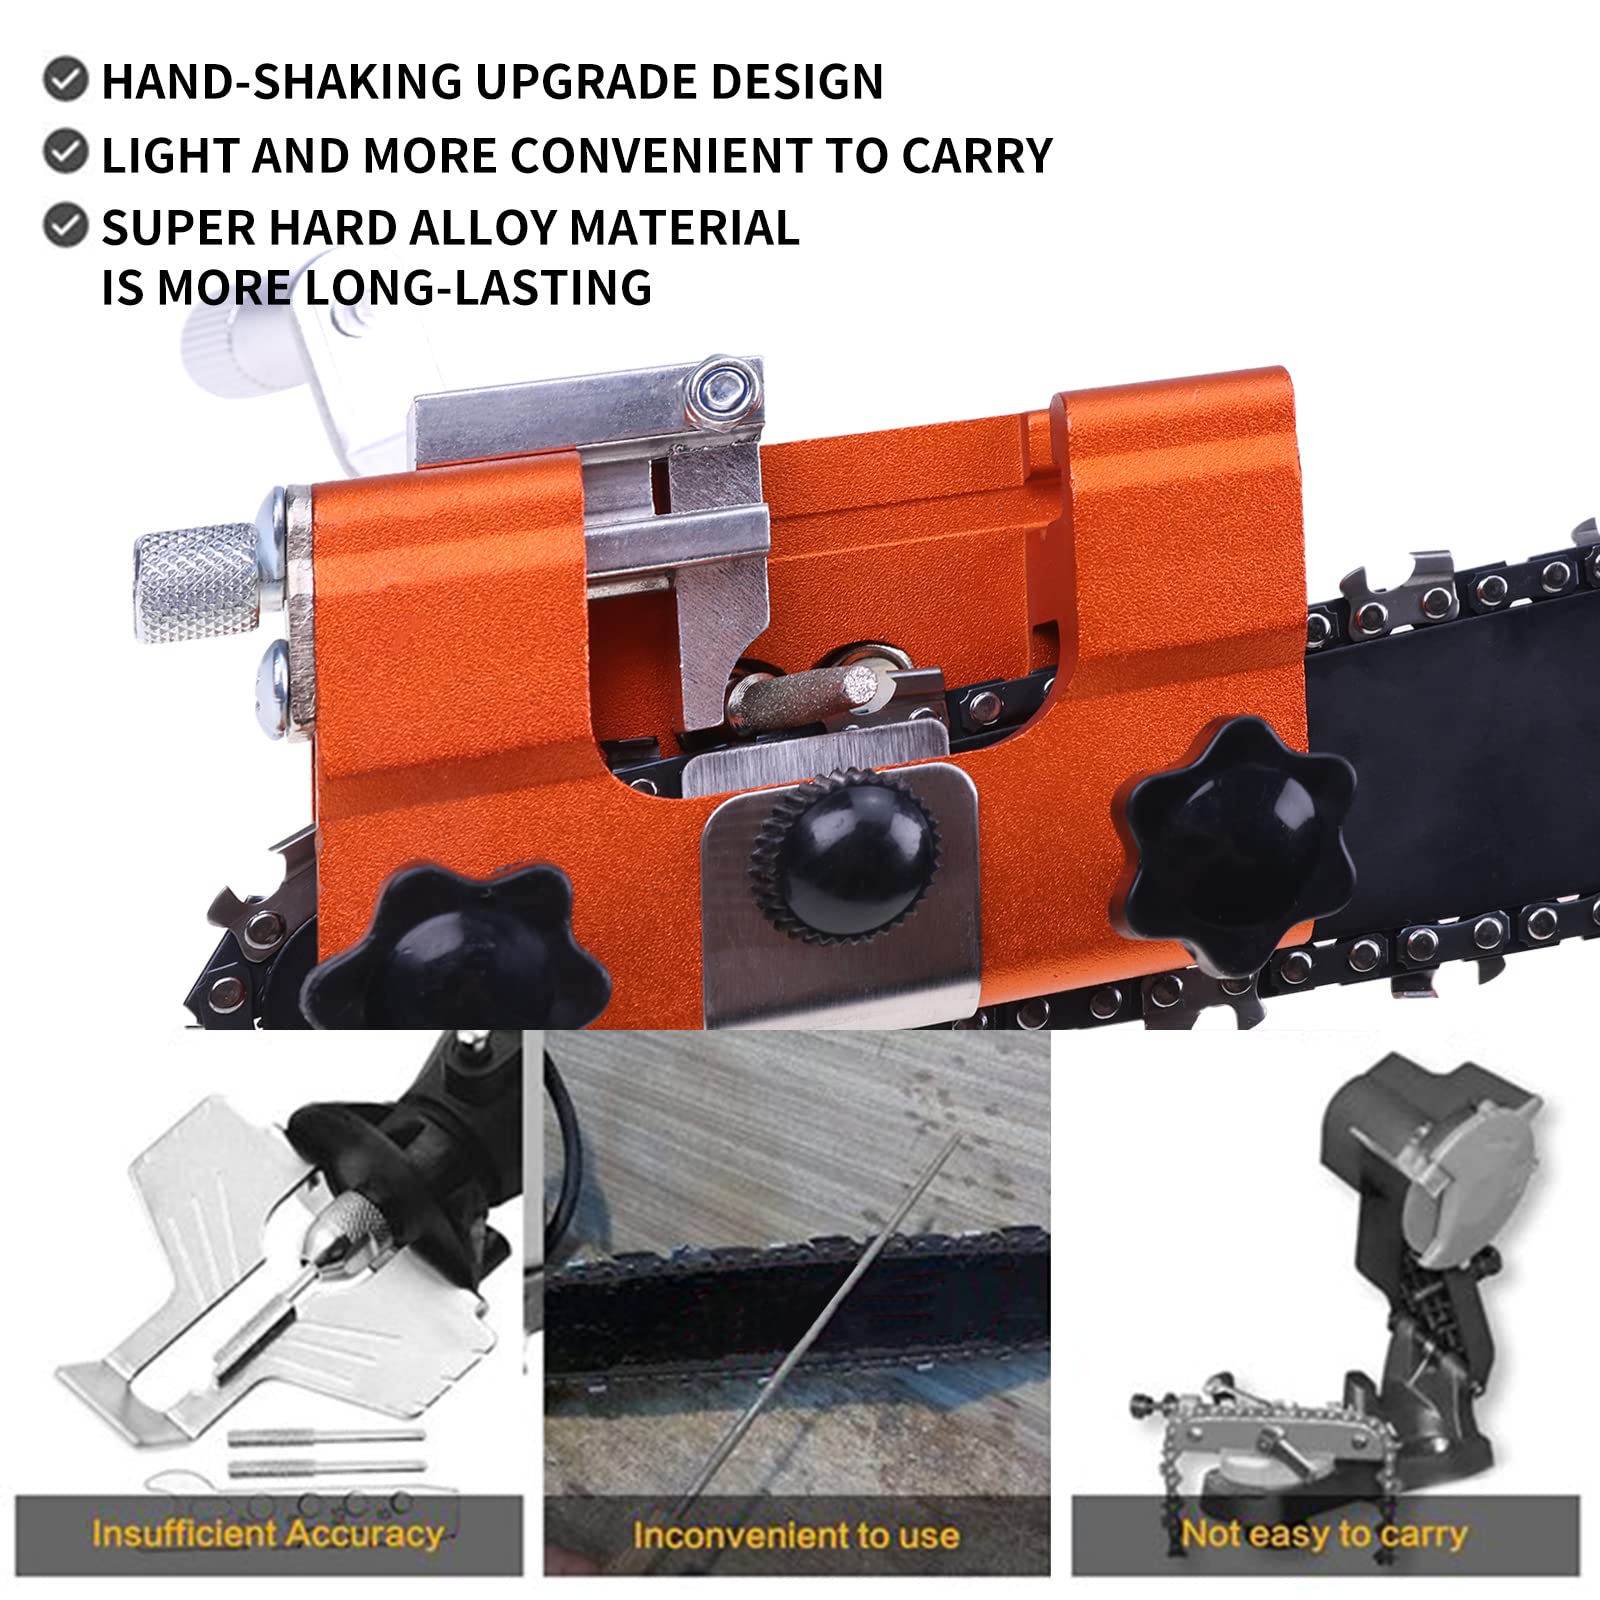 Etersec Chainsaw Sharpener Electric Sharpening Jig Set Equipped With Glove Brush Head Grinding Head Suitable for All Kinds of Chain, for Electric Saw